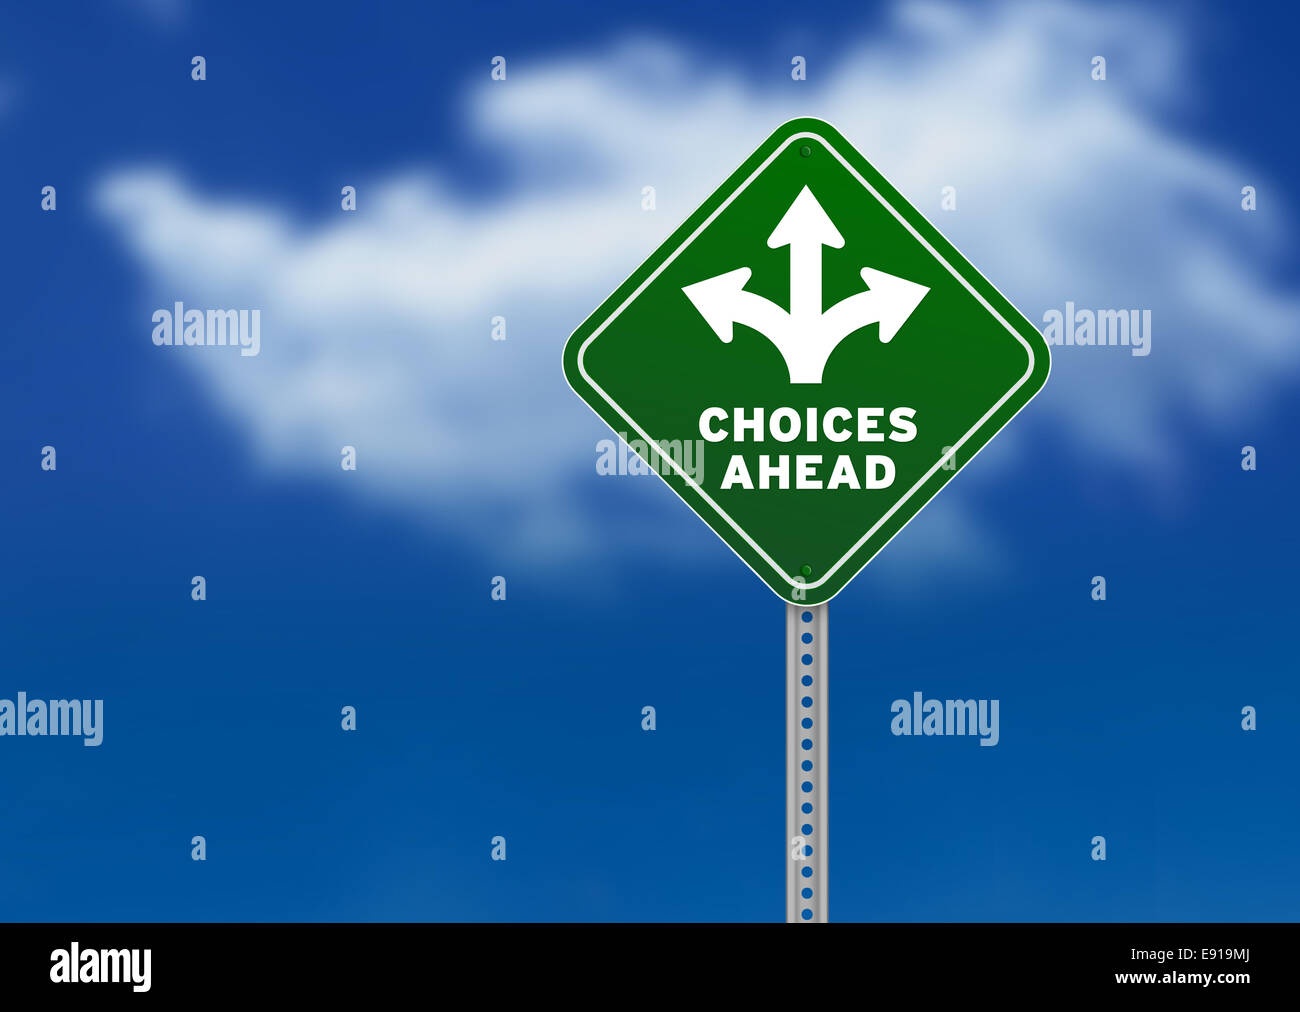 Choices Ahead Road Sign Stock Photo